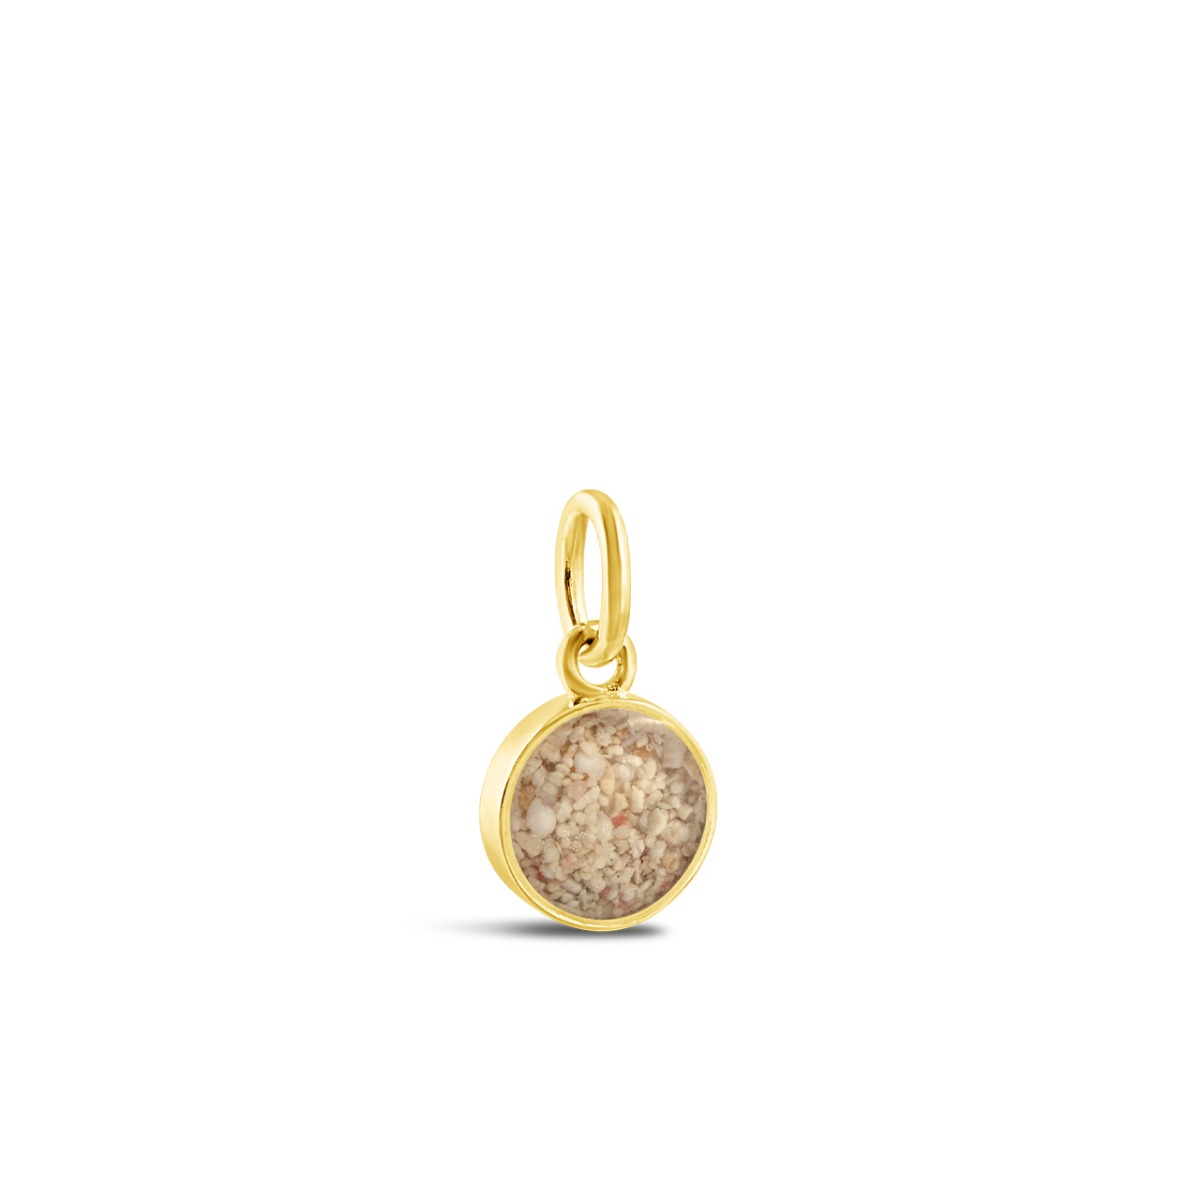 Collectible Travel Treasures™ Customizable Round Charm - 14k Gold Vermeil